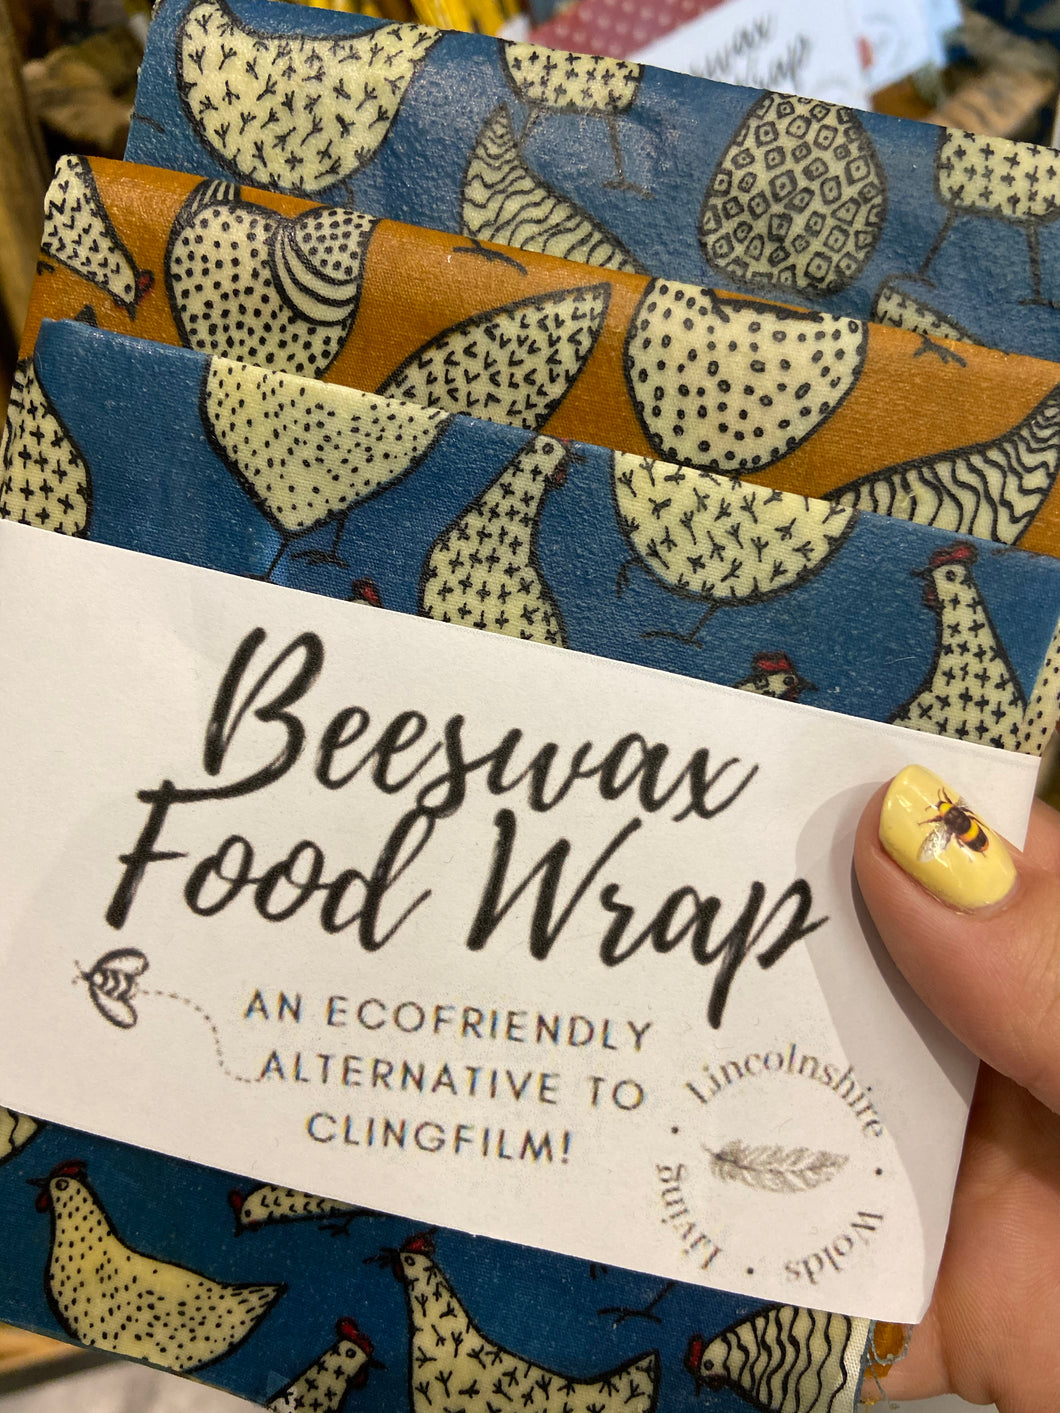 Beeswax Food Wraps | Chickens